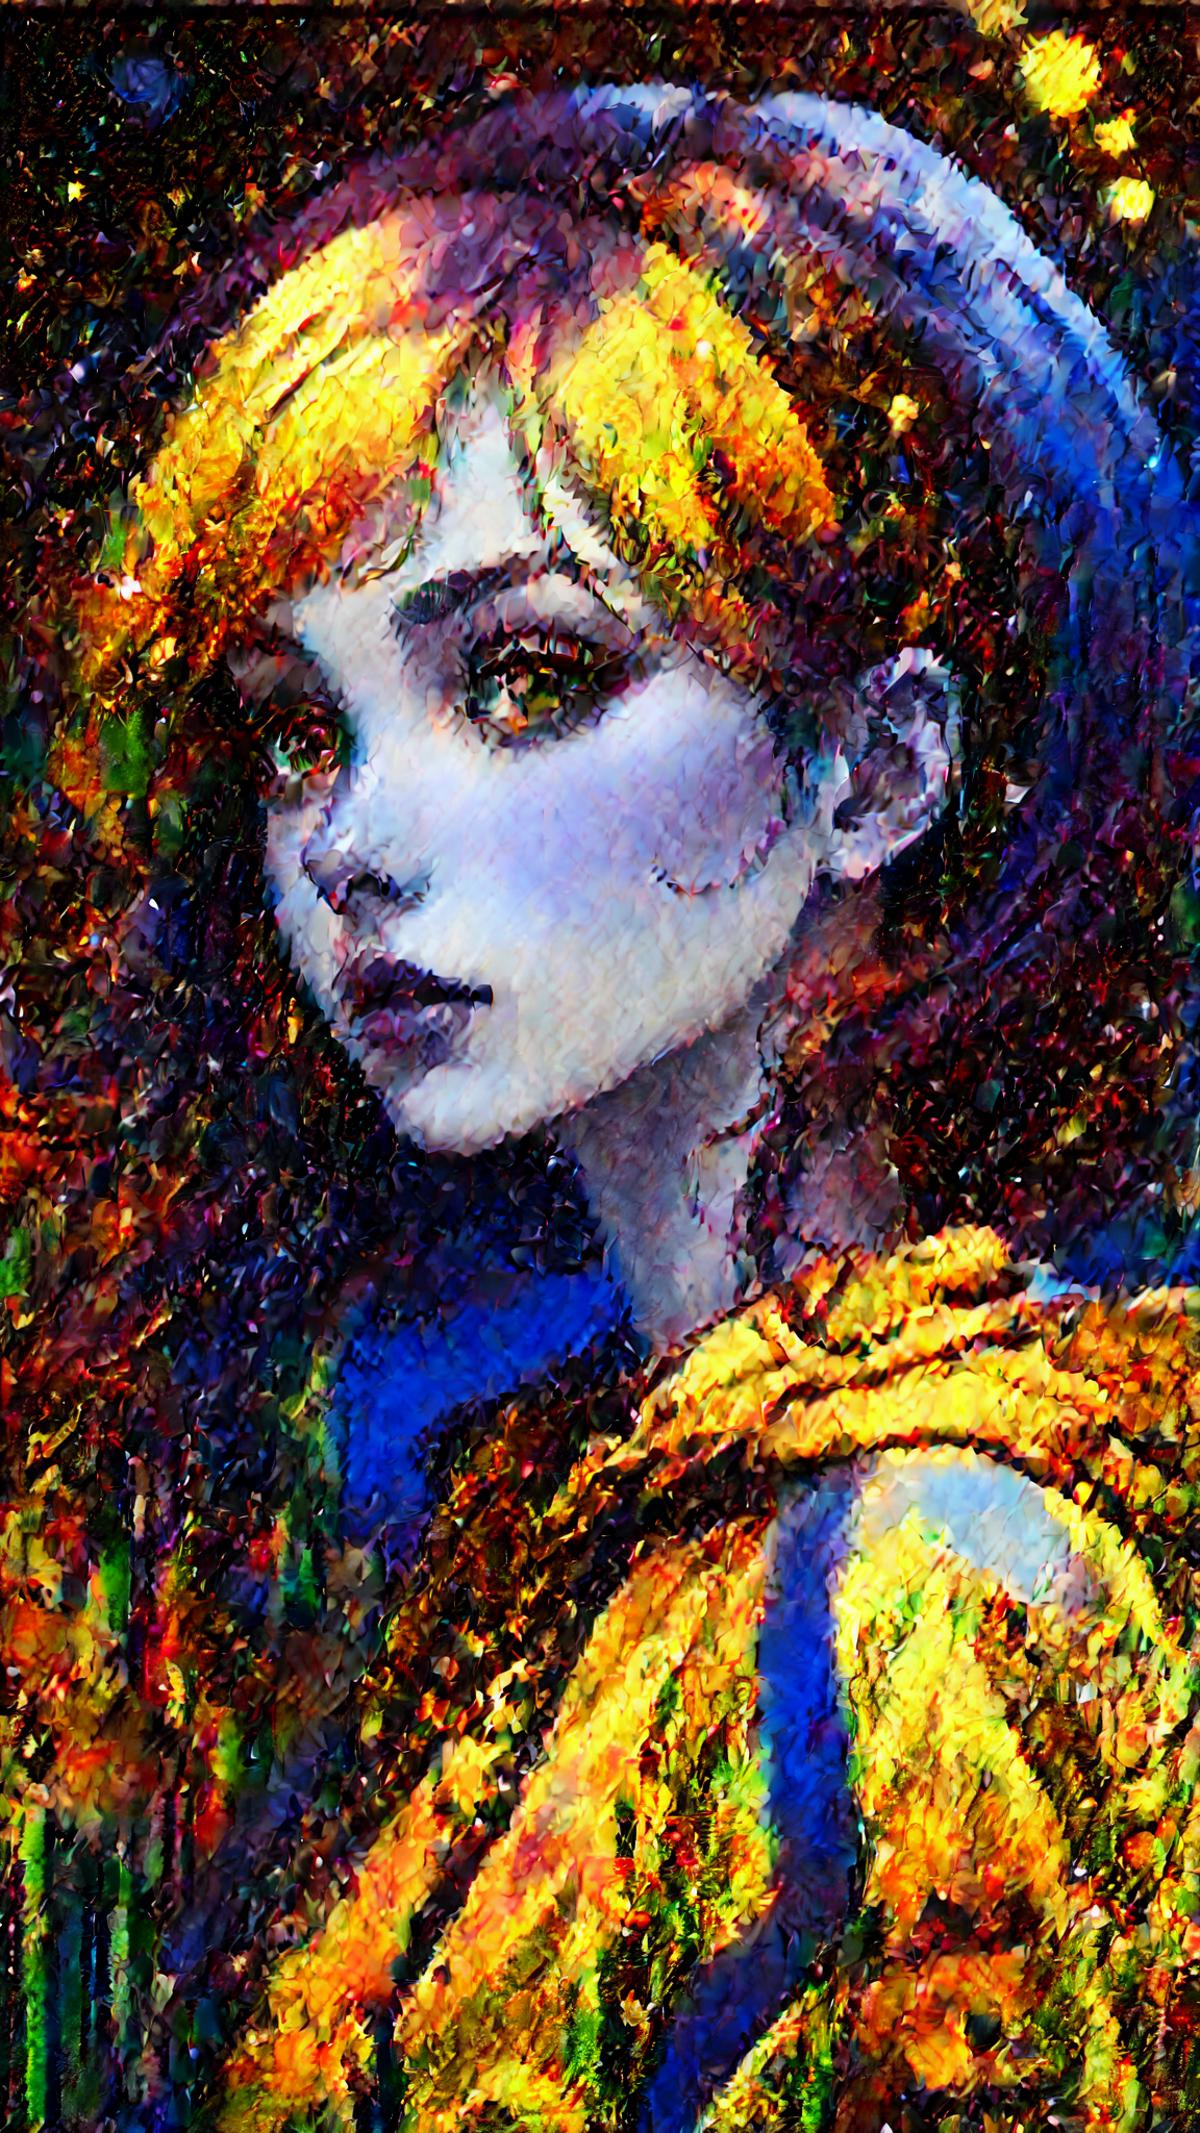 A portrait of a woman with vibrant red hair and yellow eyes.